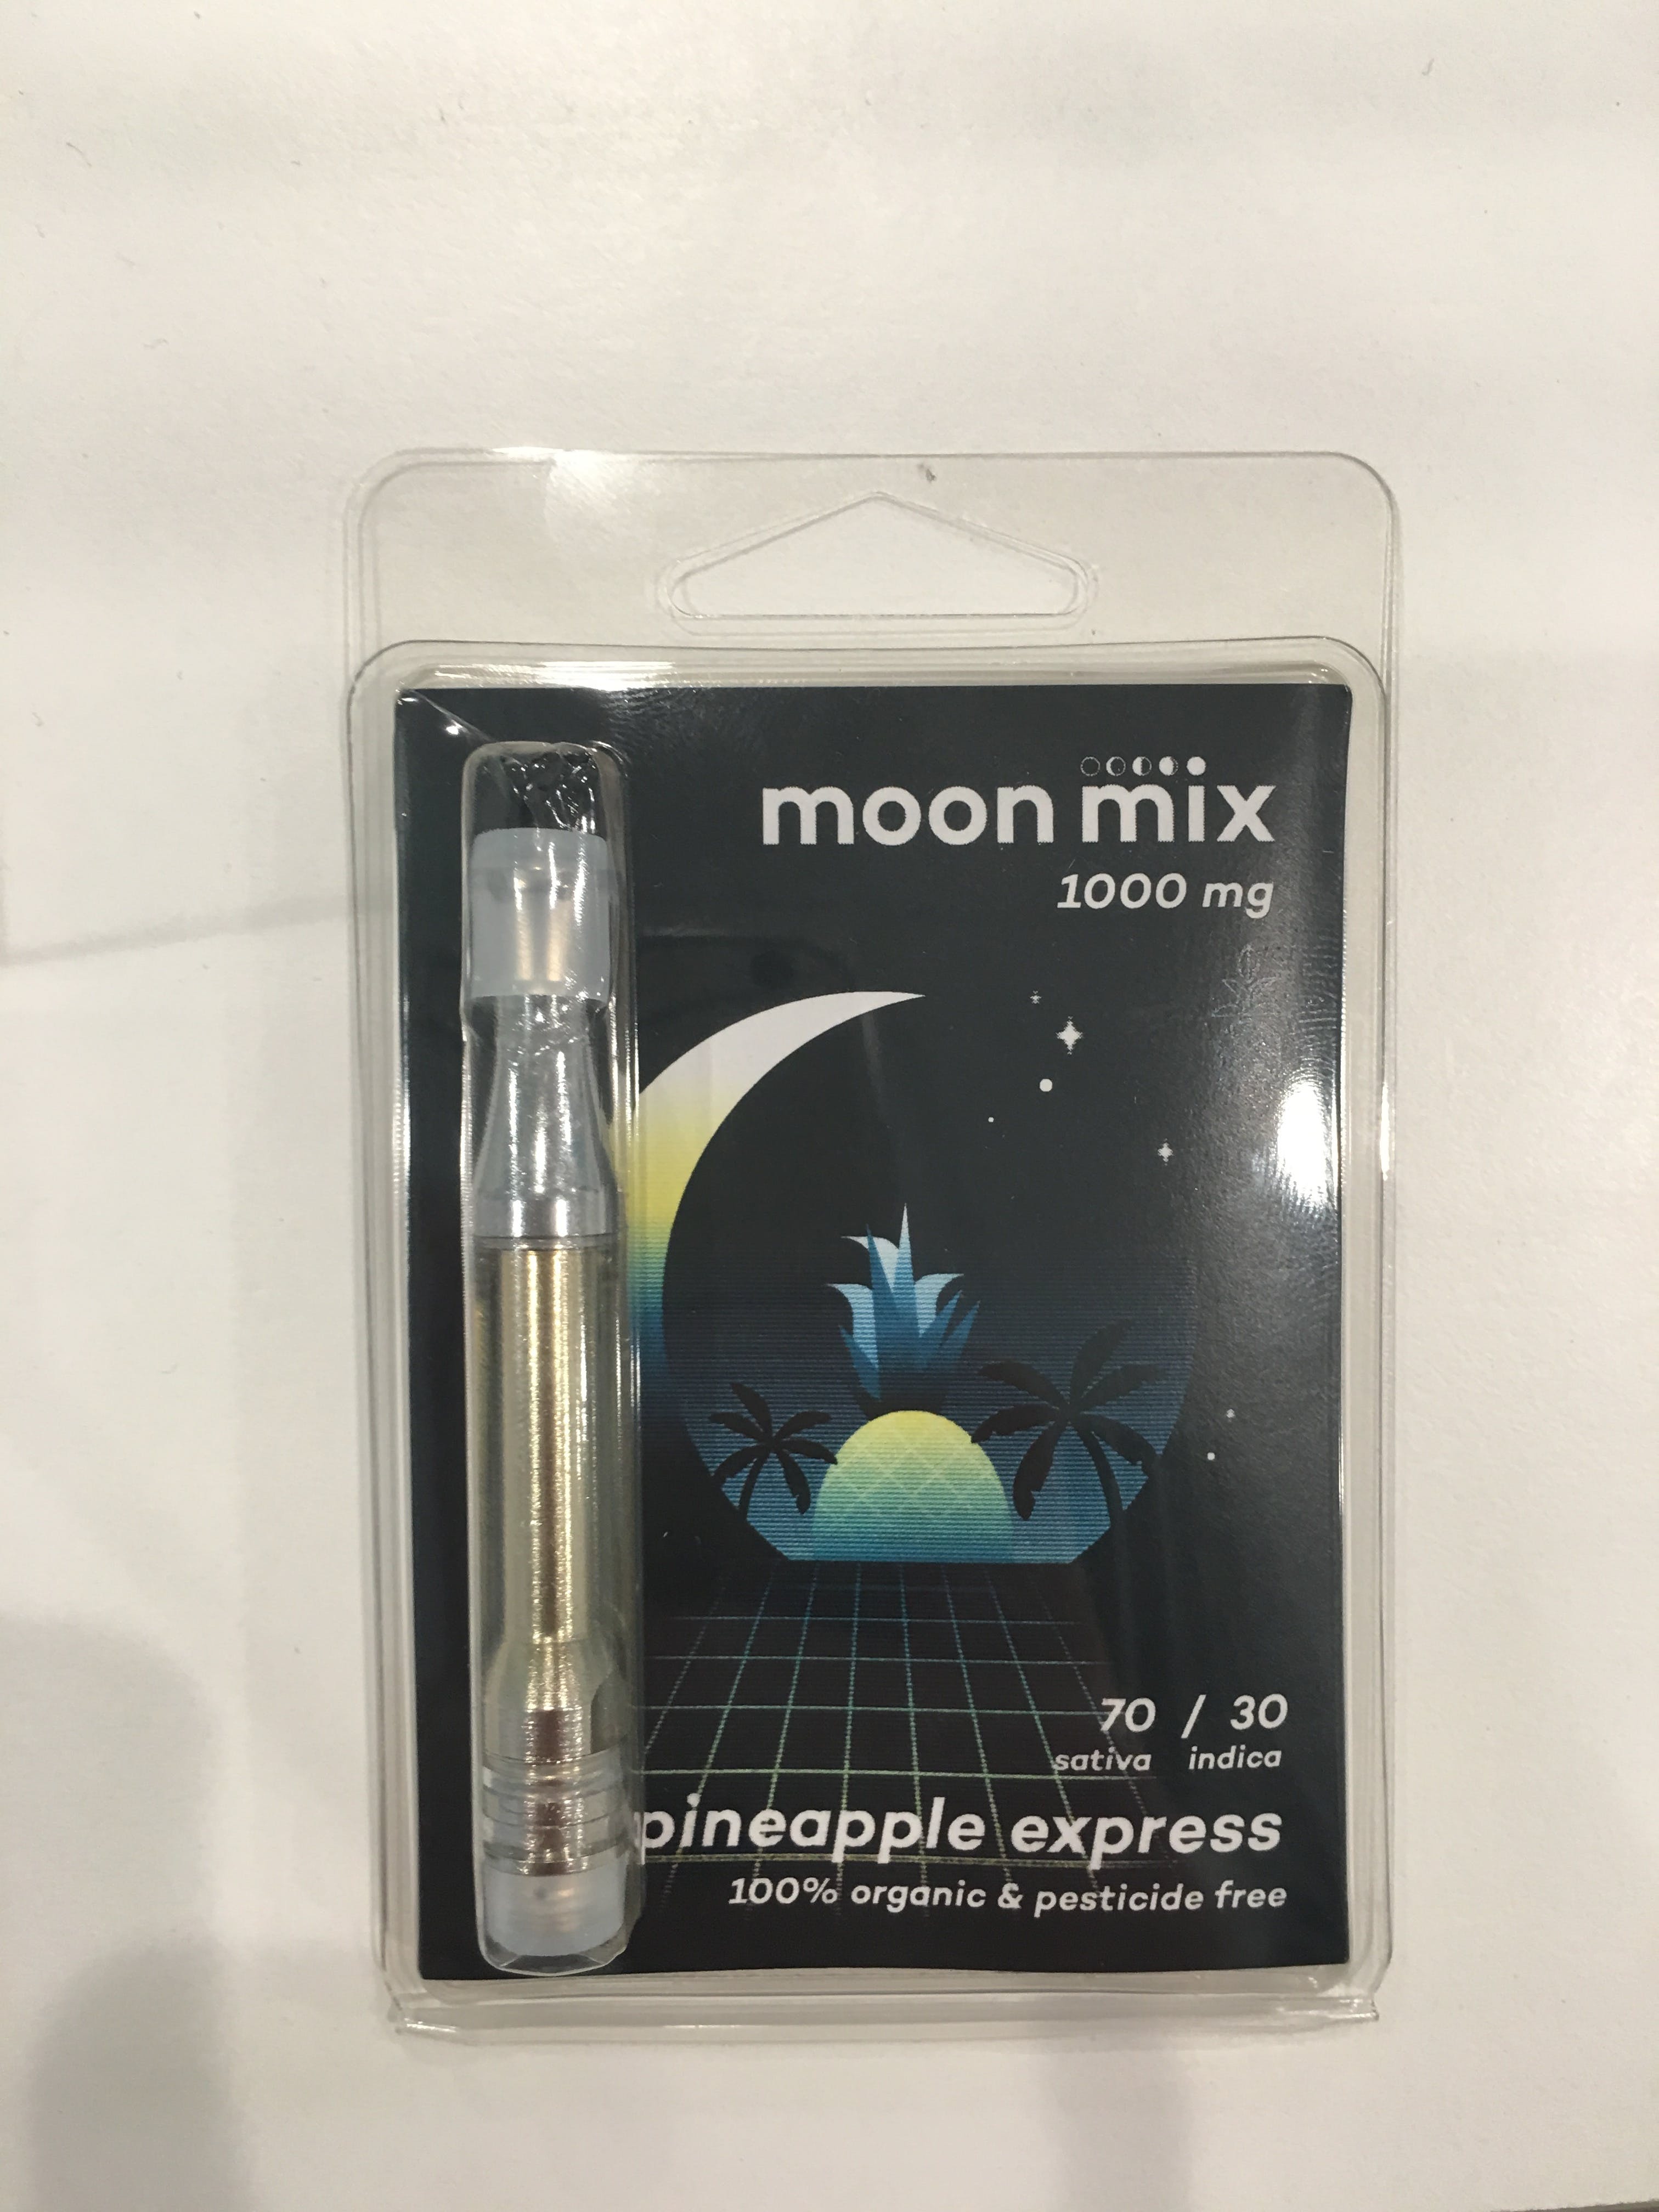 concentrate-moon-mix-pineapple-express-70-25-sativa-30-25-indica